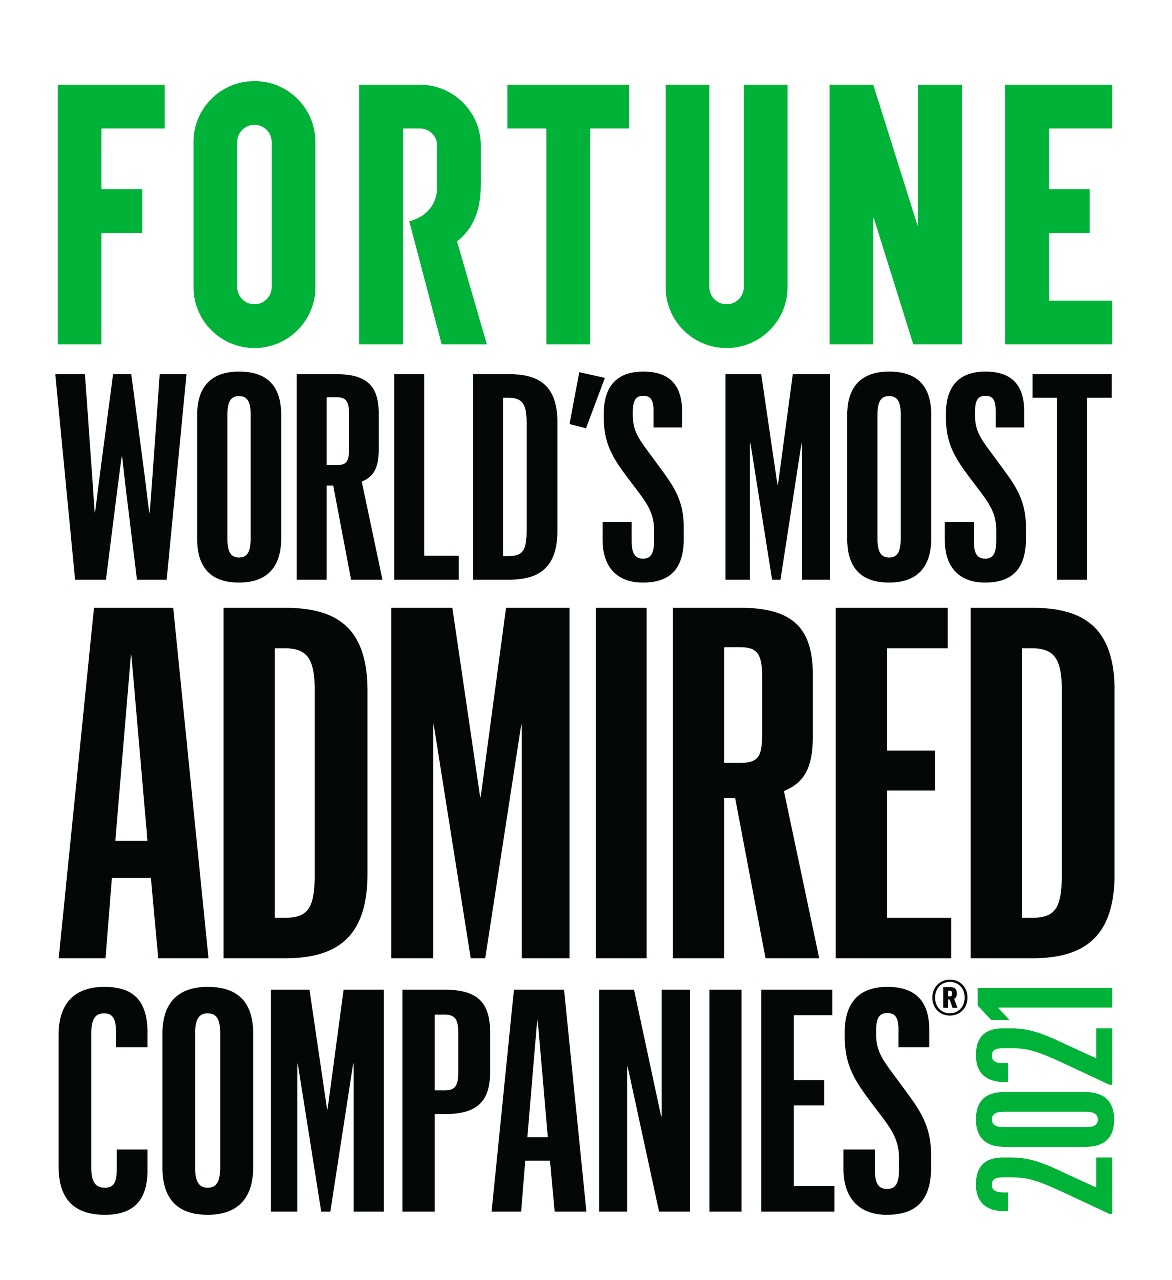 Fortune World Most Admired Companies